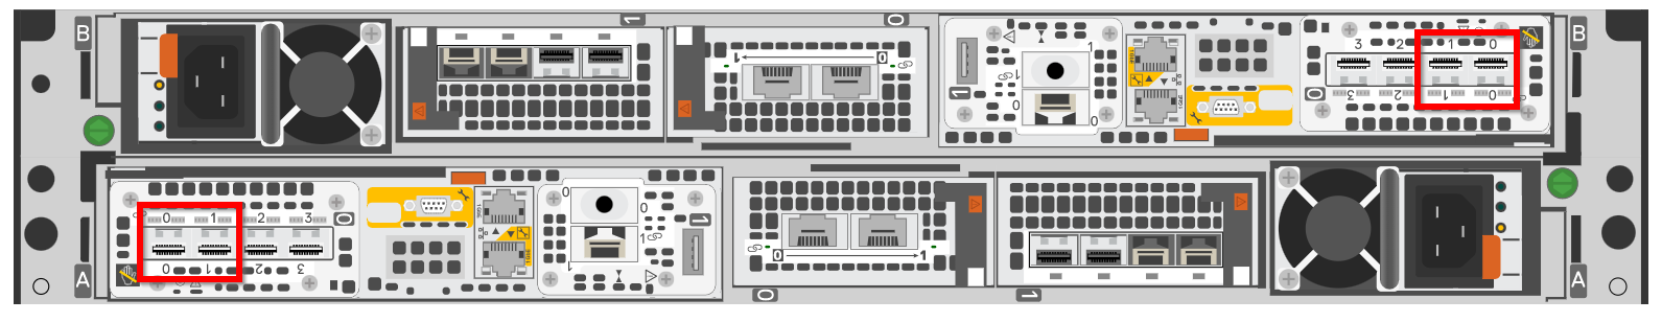 This figure shows the first 2 ports of the 4 port card for each node on the back of the PowerStore hardware, it makes up the system bond.